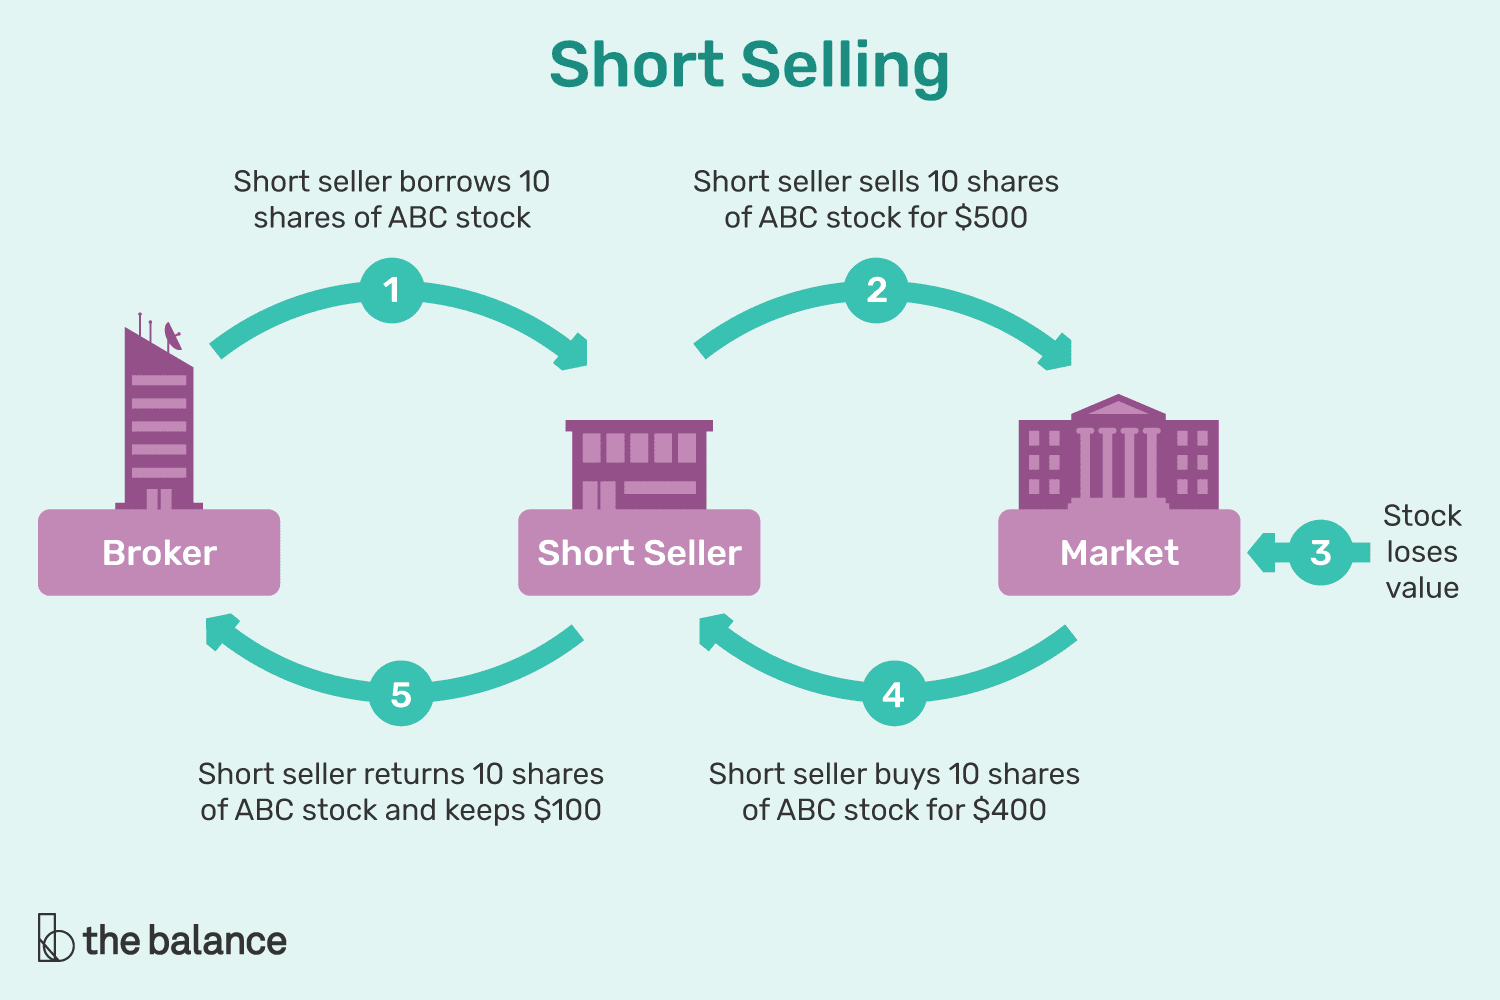 Image shows three buildings describing how stock shorting works. One building represents a broker, one a short seller, one the market. 